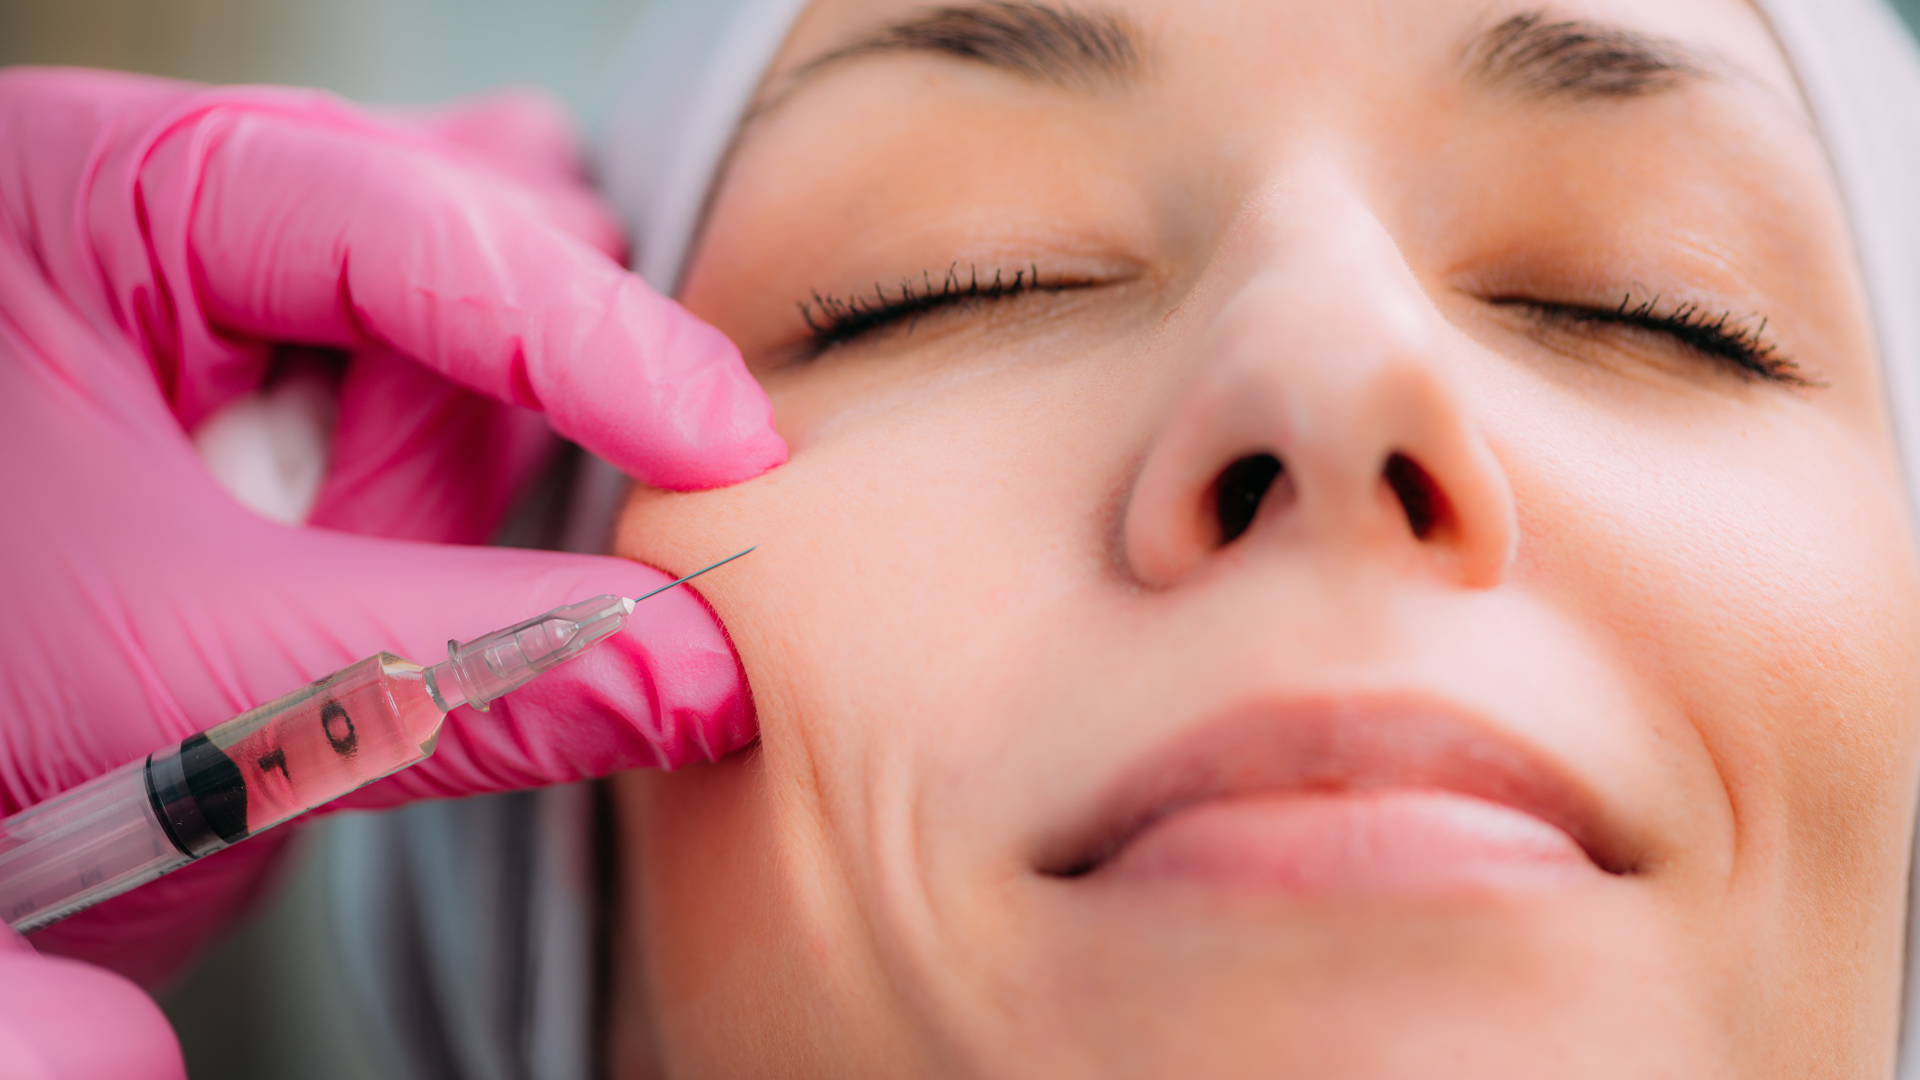 Woman getting Radiesse filler for face sculpting.